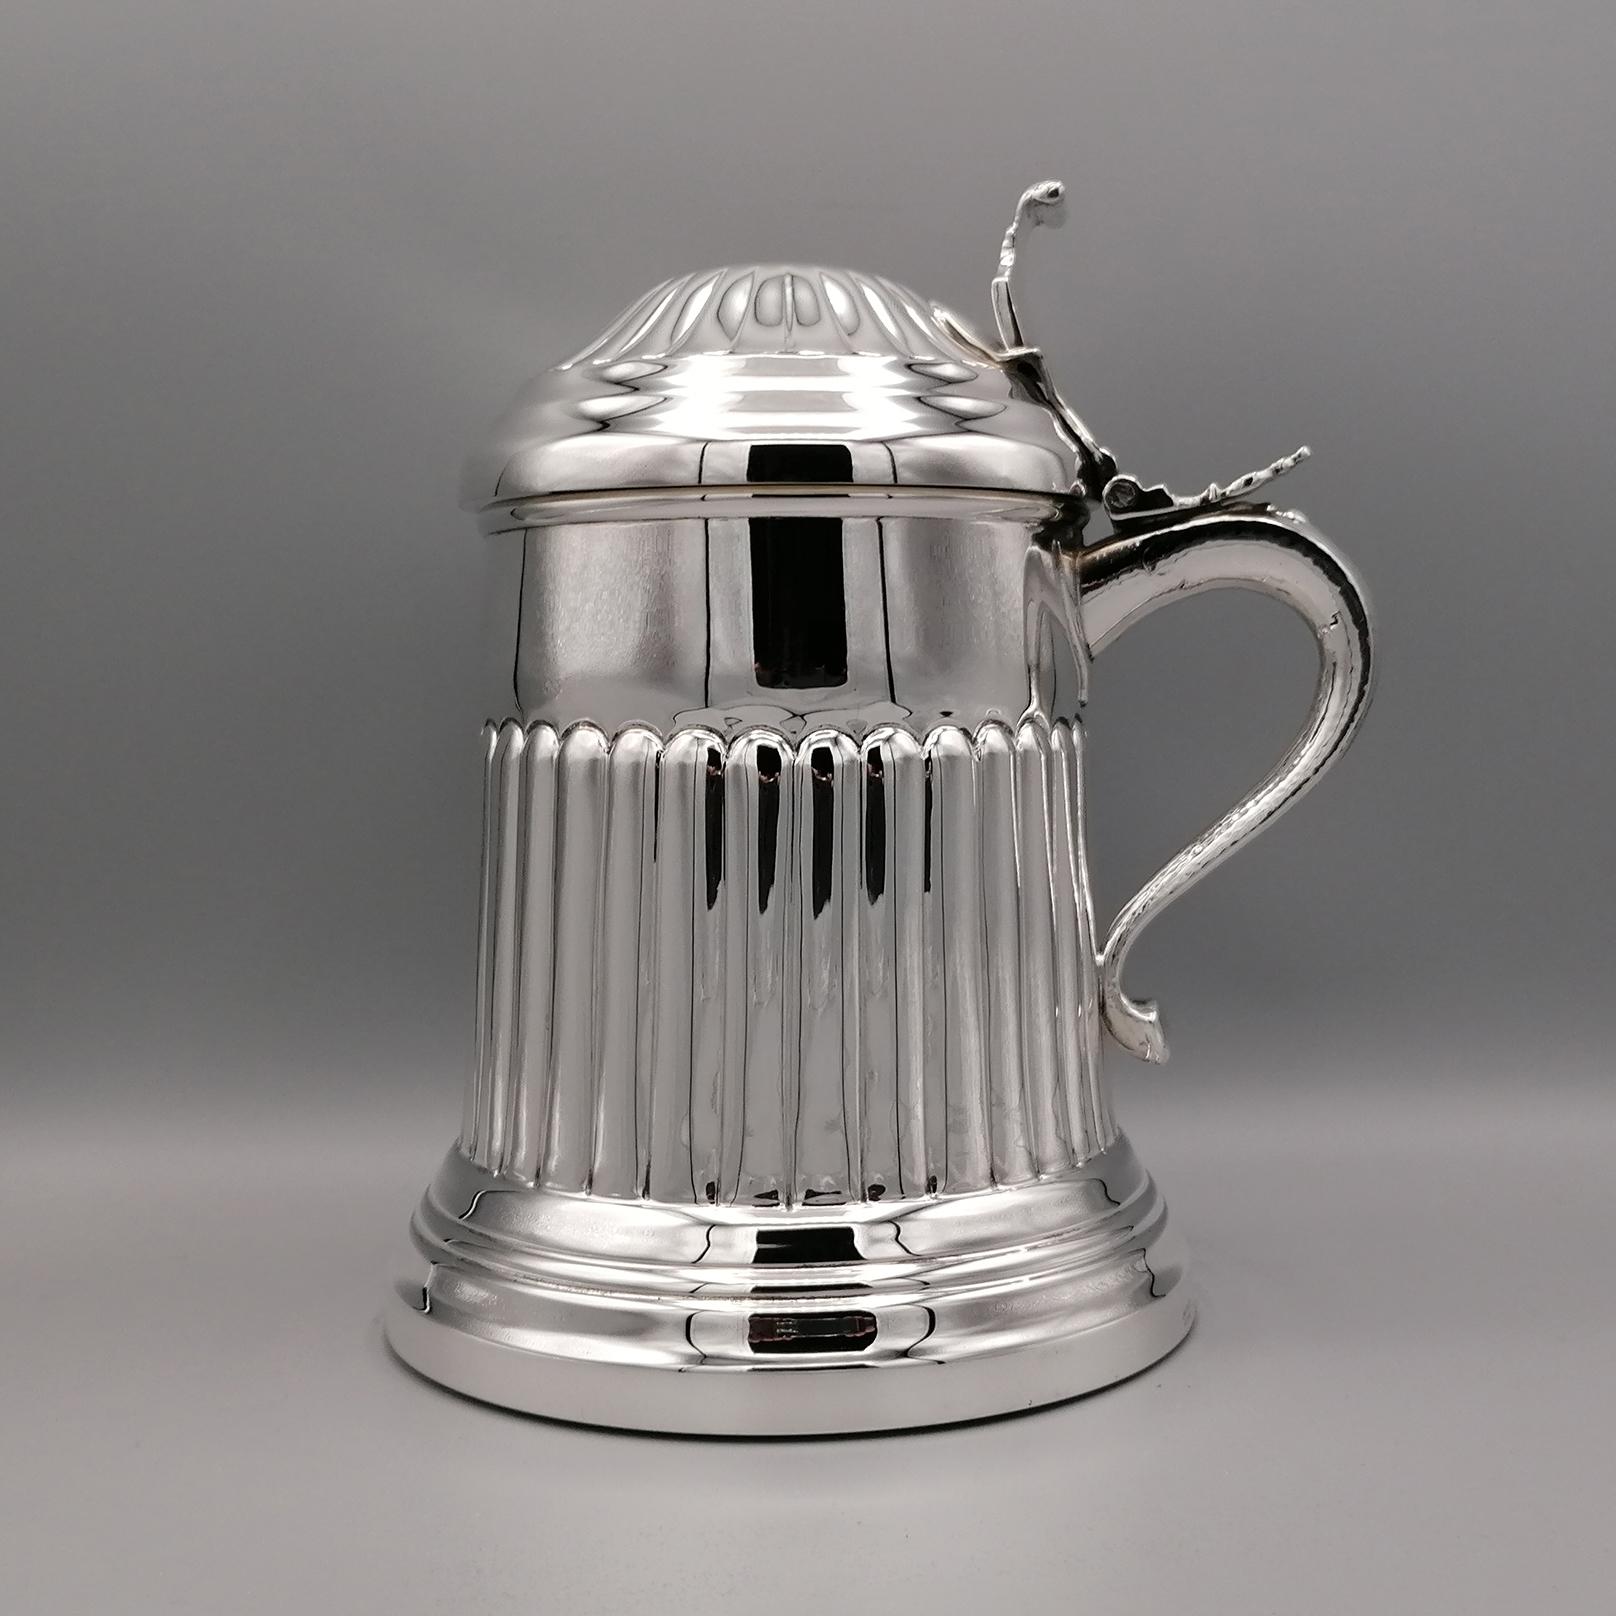 Queen Anne style tankard in solid silver in a conical shape chiseled with fluted motifs.
The lid is also chiseled with fluted.
Inside is placed a removable thermos to keep the drink frozen
1100 grams - 38,80 ounces
Italian silverware, already with a